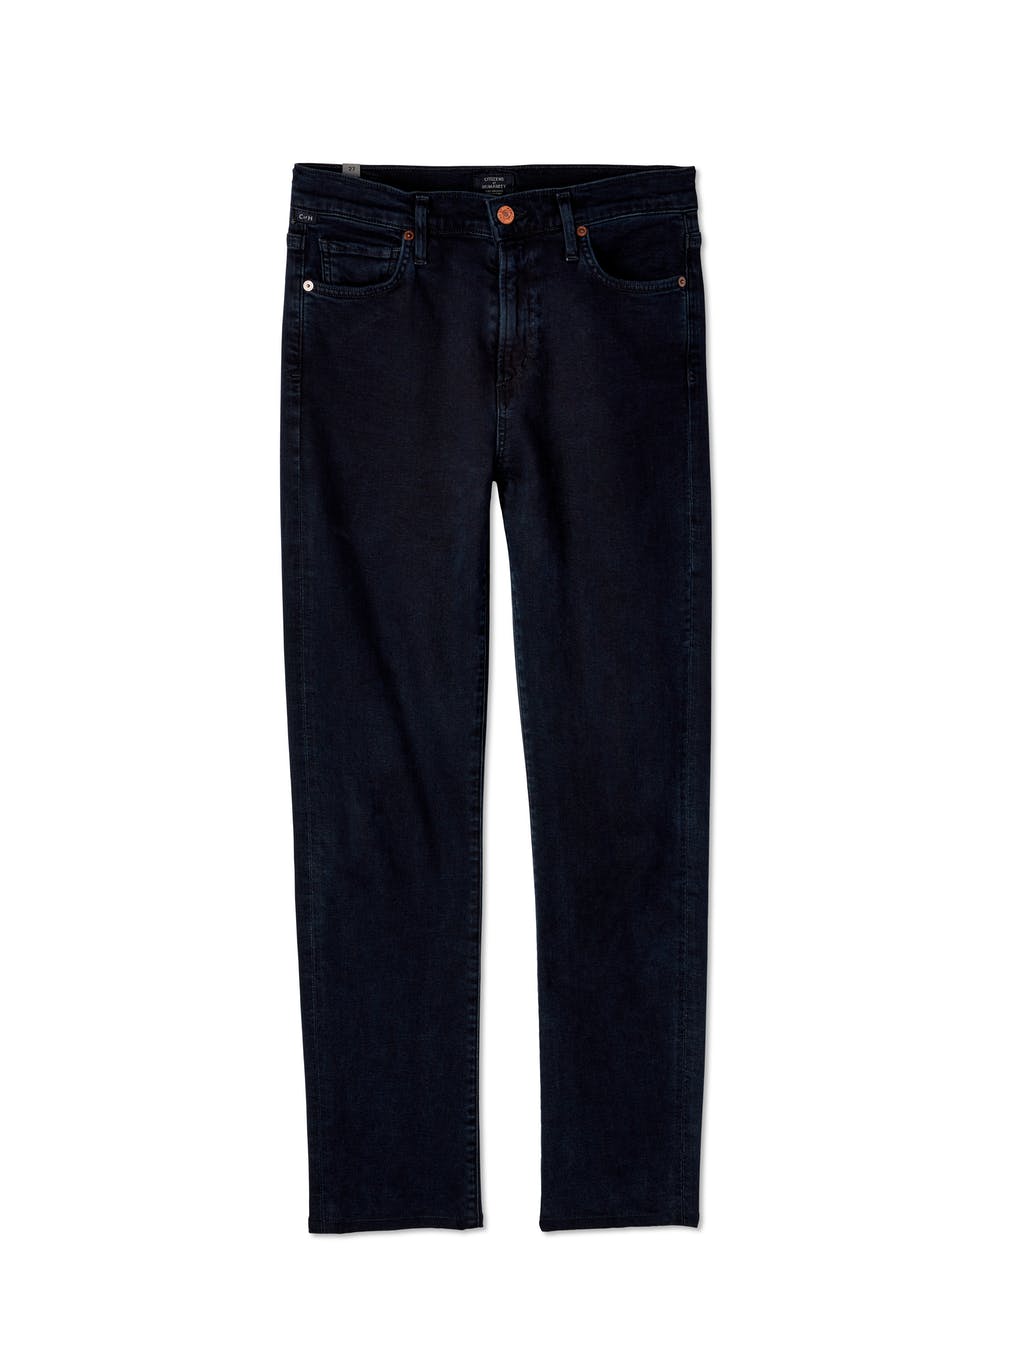 Harlow Mid Rise Ankle Cut Slim Fit Jeans